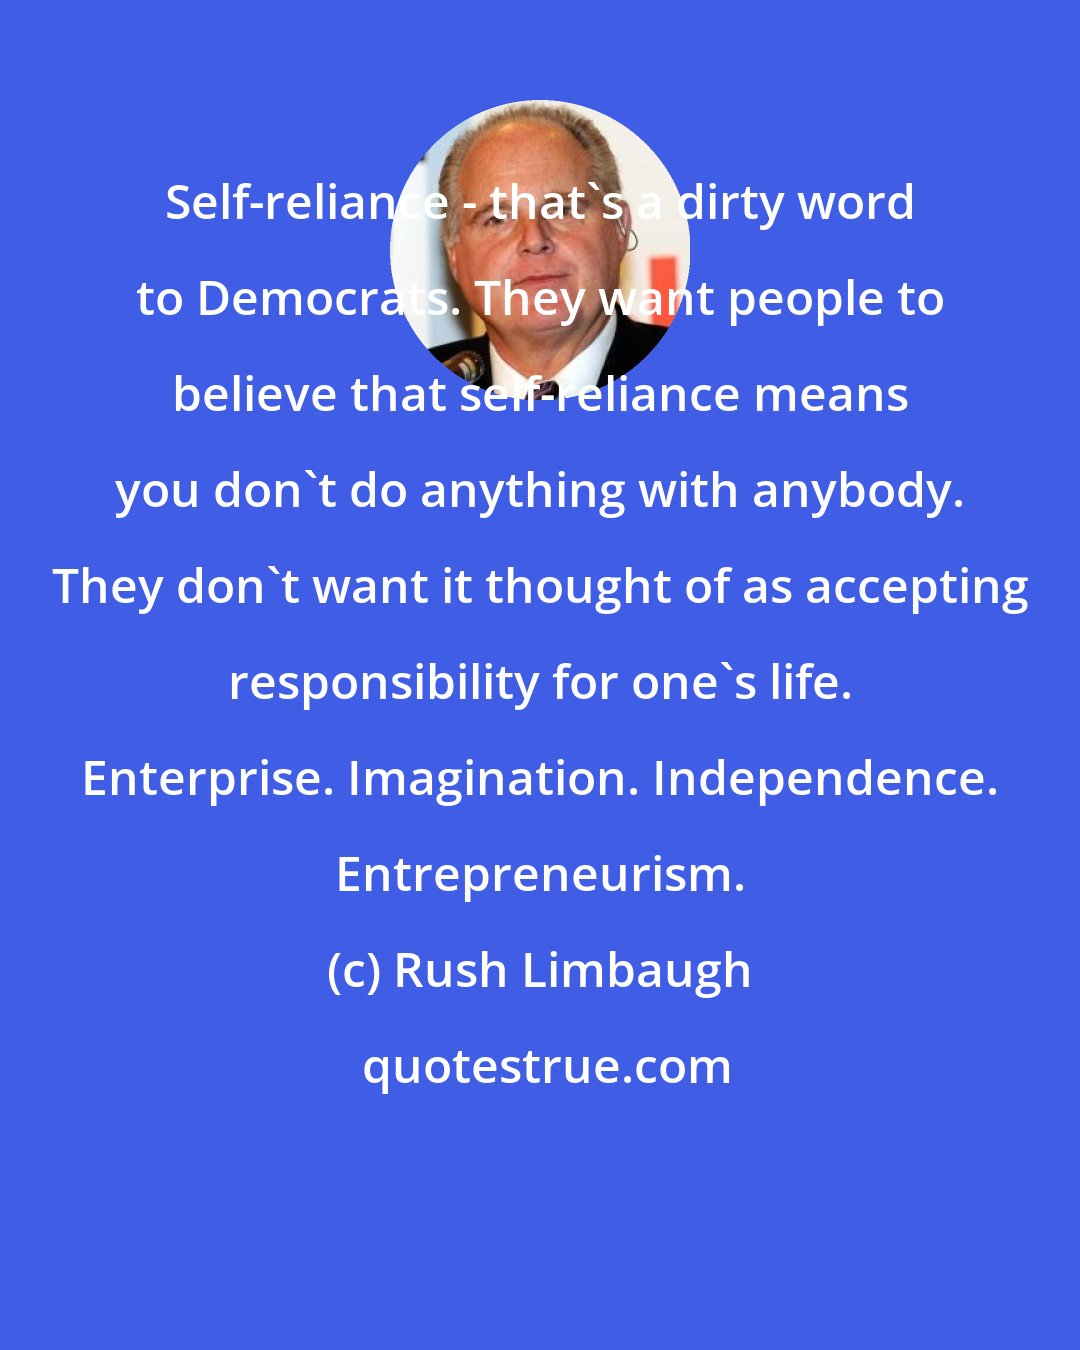 Rush Limbaugh: Self-reliance - that's a dirty word to Democrats. They want people to believe that self-reliance means you don't do anything with anybody. They don't want it thought of as accepting responsibility for one's life. Enterprise. Imagination. Independence. Entrepreneurism.